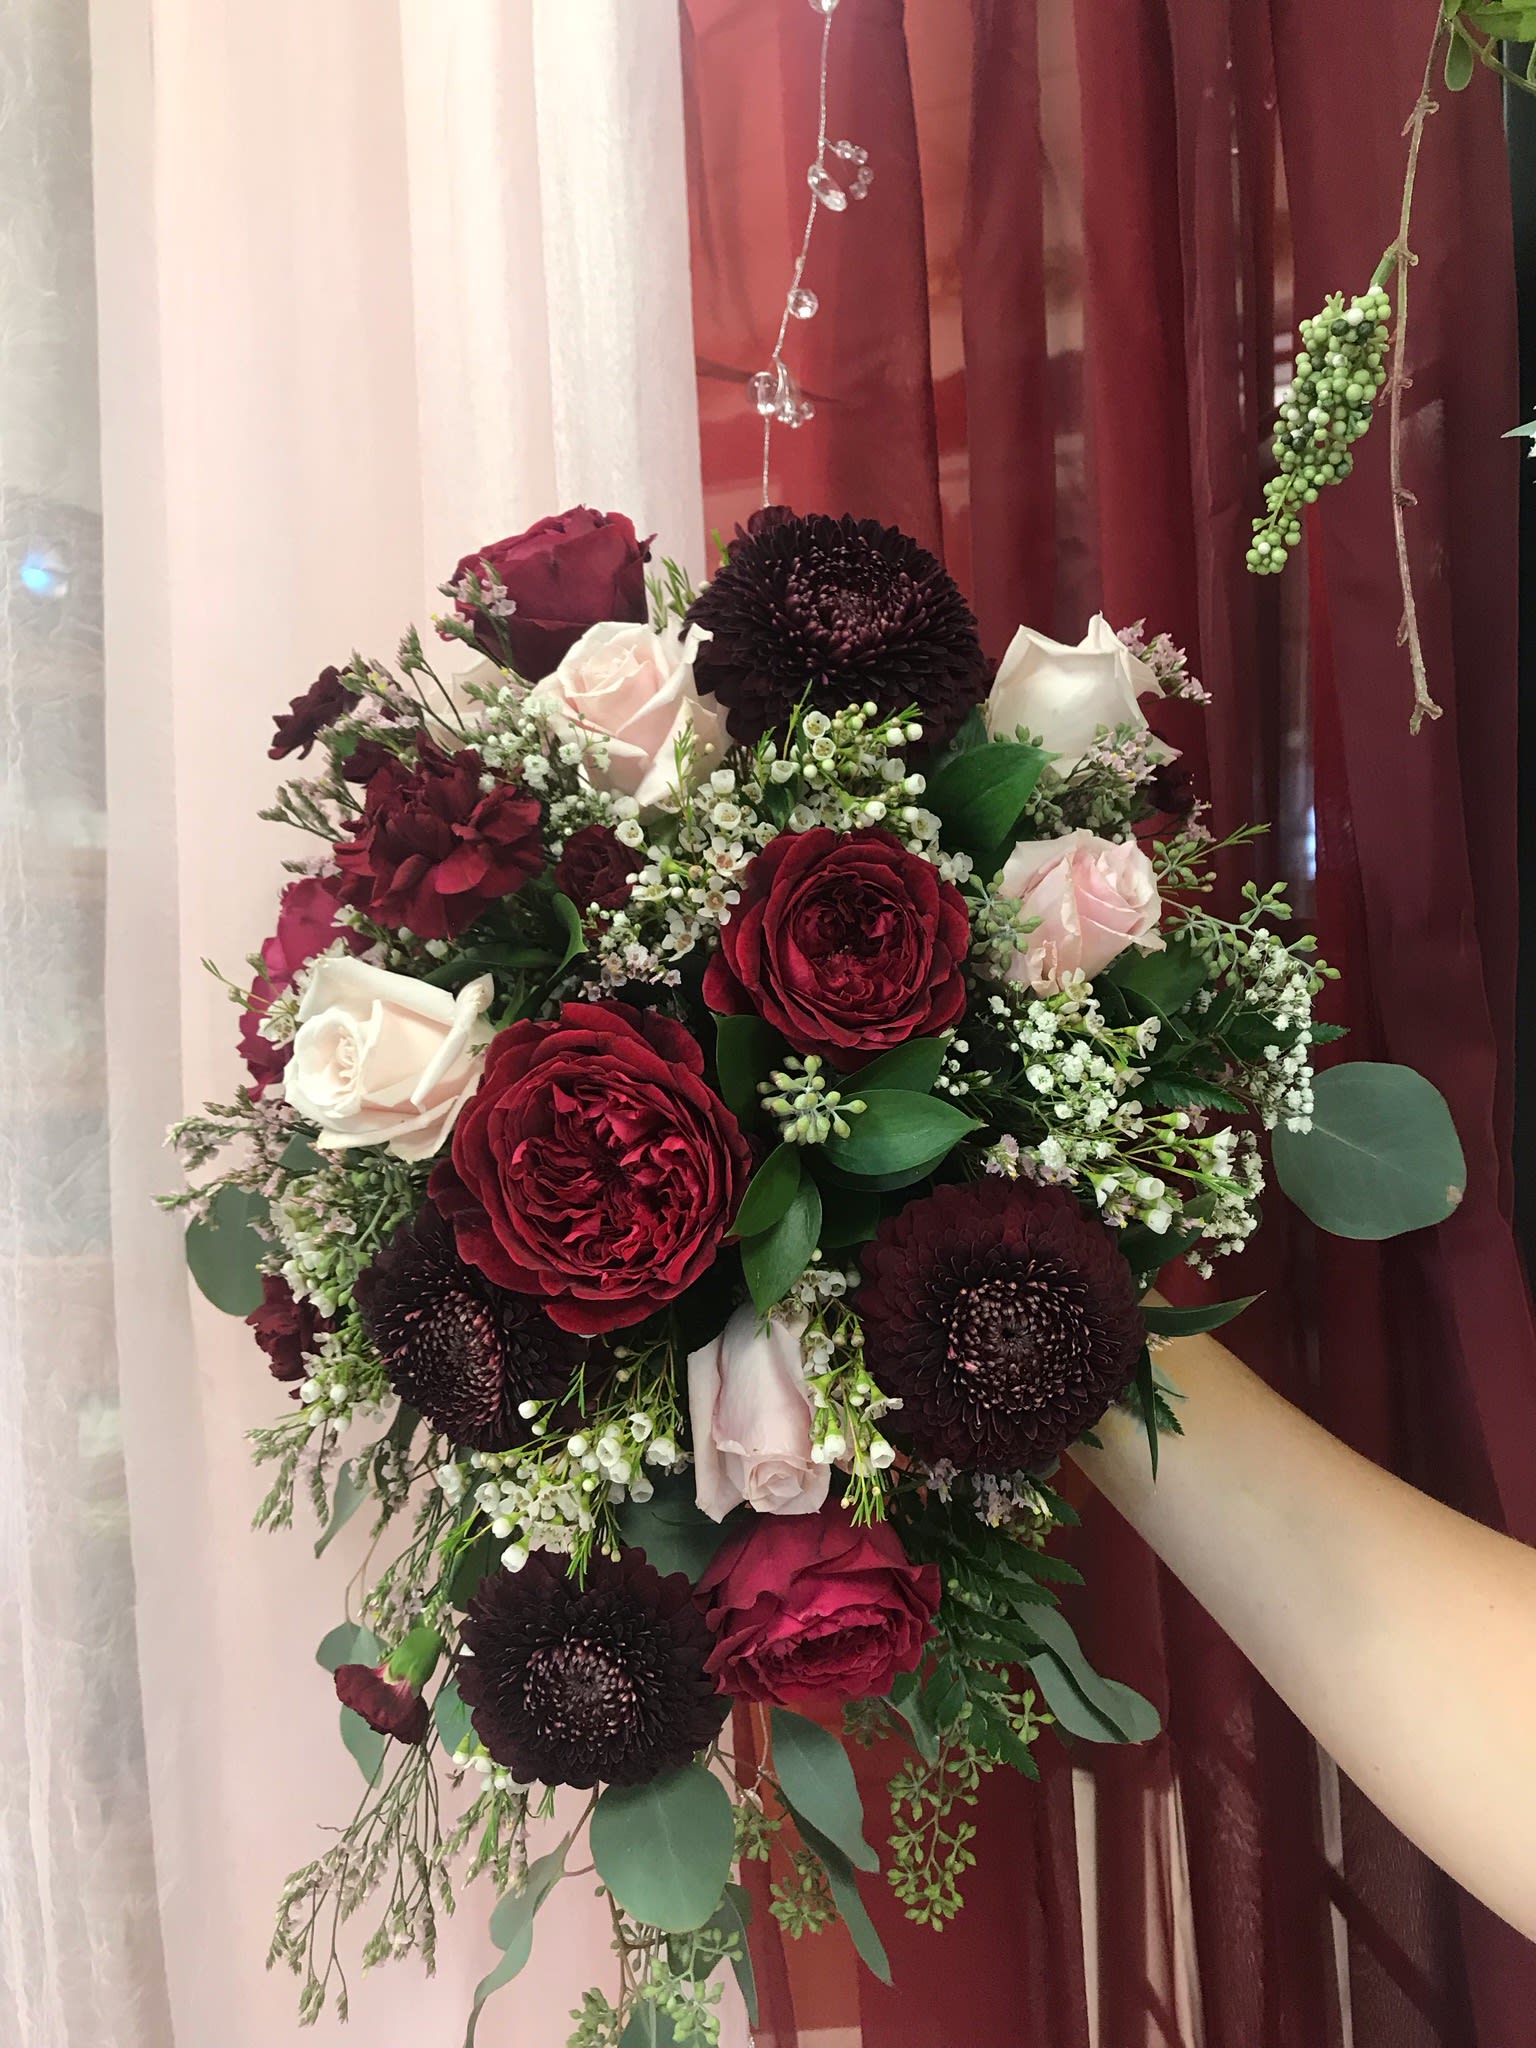 A Mixed Bouquet Of Beautiful Flowers For A Perfectly Elegant Bouquet In